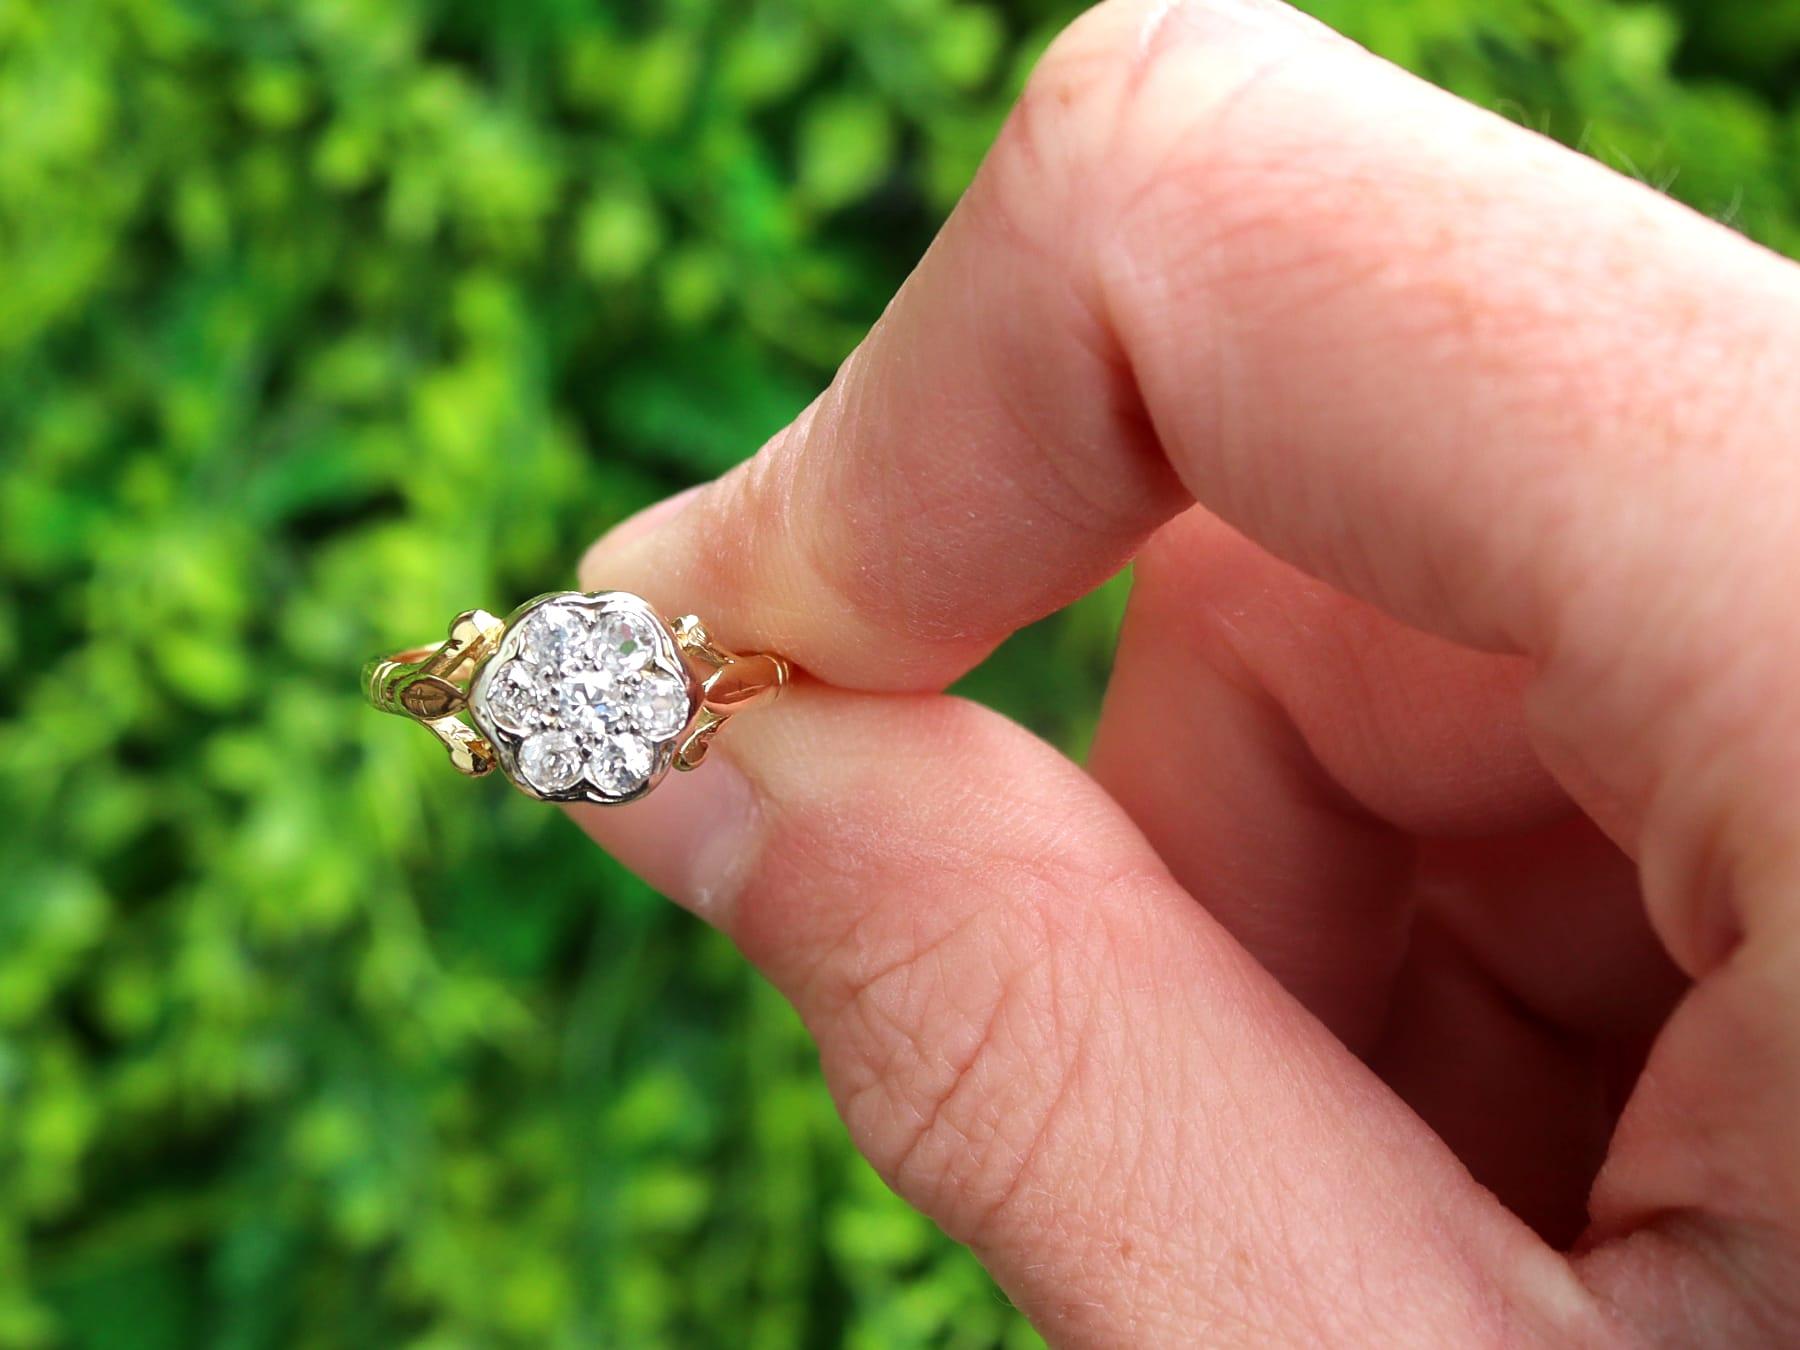 A fine and impressive vintage 0.51 carat diamond and 18 karat yellow gold, 18 karat white gold set cluster ring; part of our collection of vintage diamond rings

This fine and impressive vintage diamond cluster ring has been crafted in 18k yellow